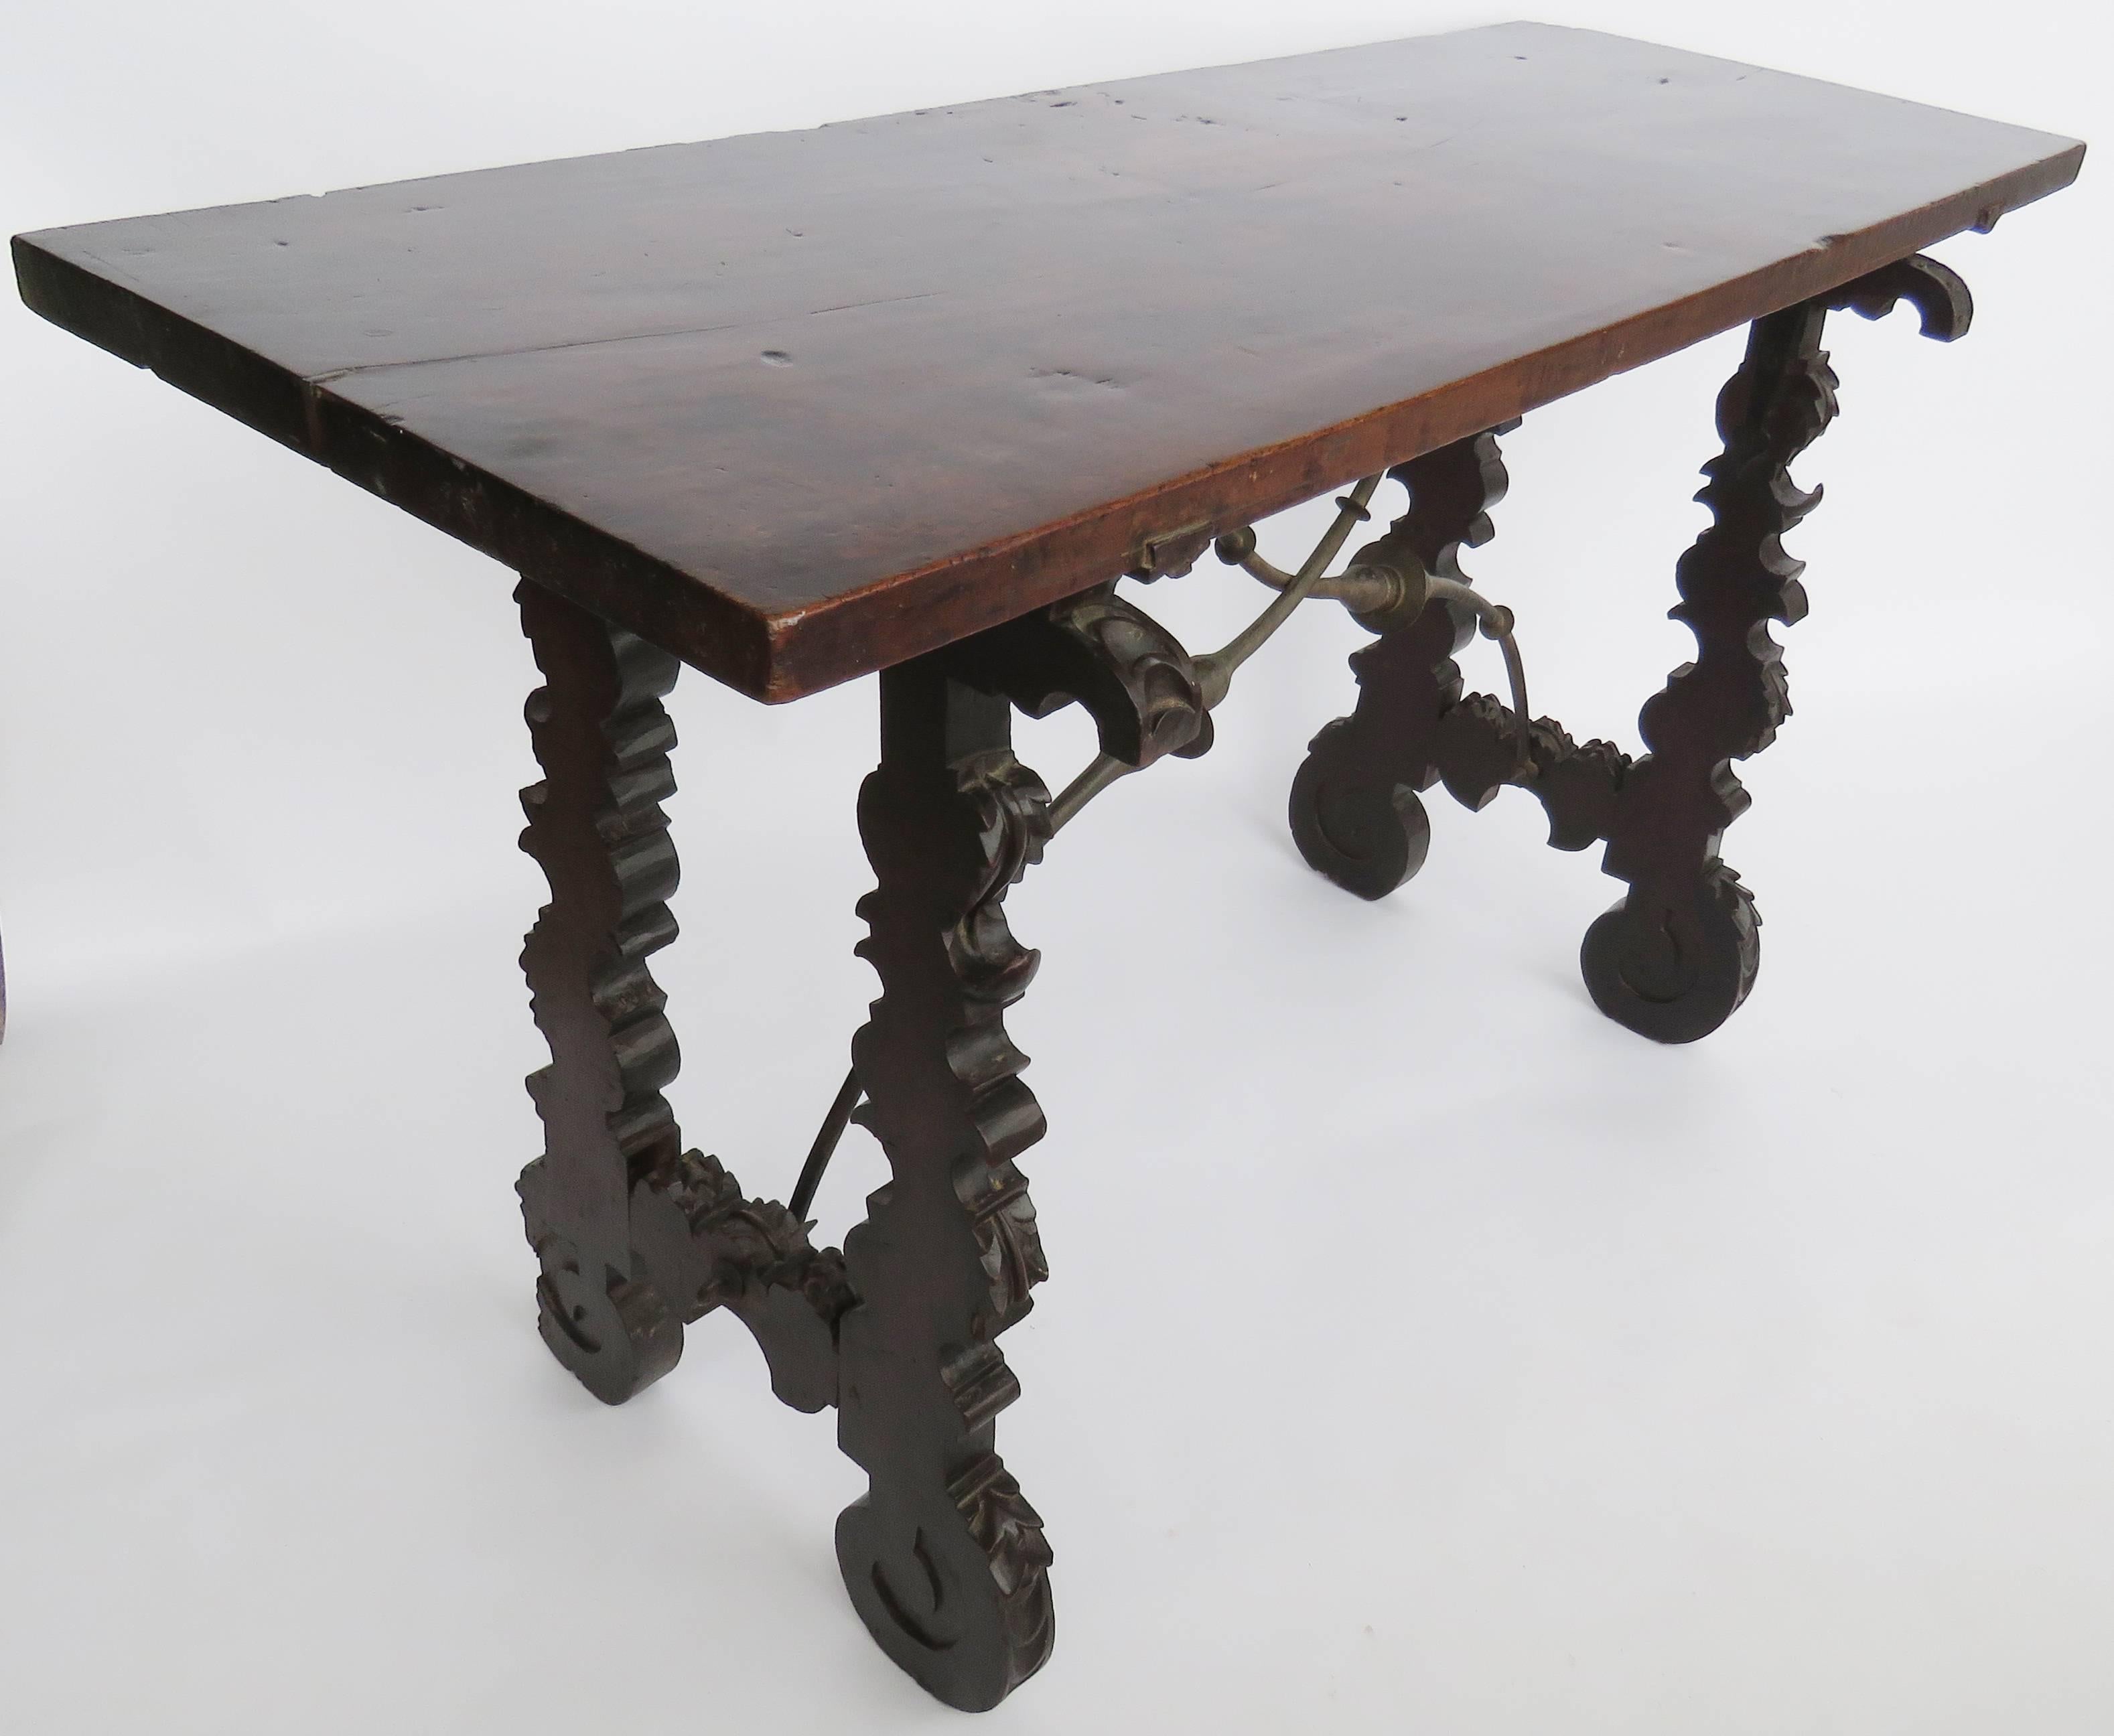 Rectangular single plank top over removable acanthus supports raised on molded elaborately chip-carved scrolled legs ending in inward scrolling feet, united by similar stretchers, joined by forged iron incurving supports. Folding table for travel